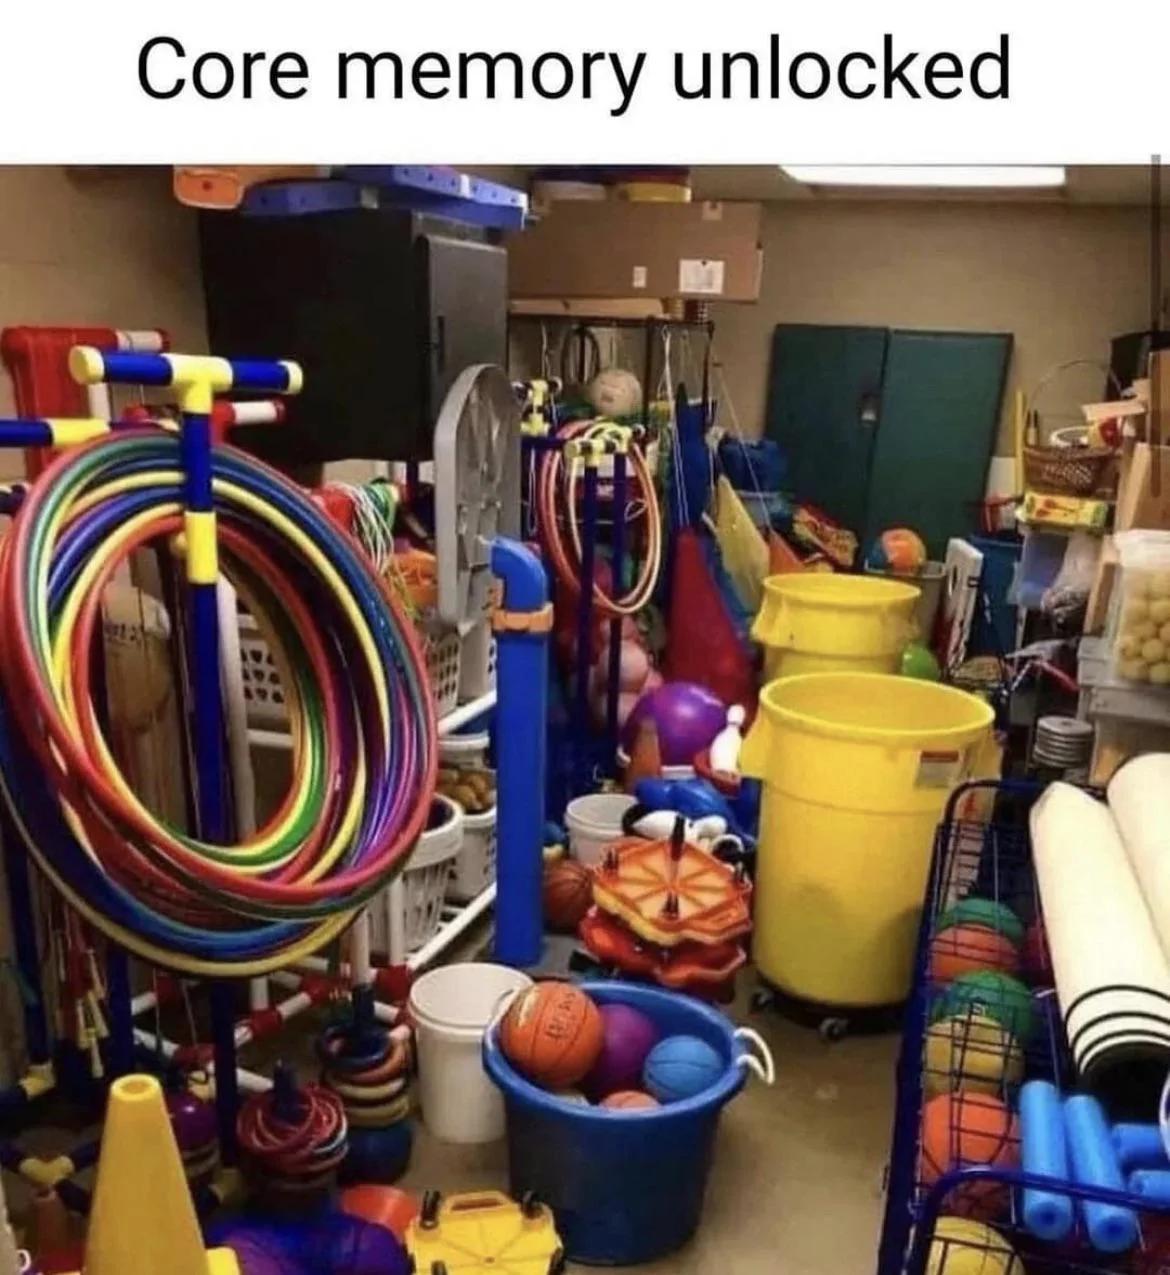 funny memes and pics  - elementary school pe equipment - Core memory unlocked 15111 Ry In